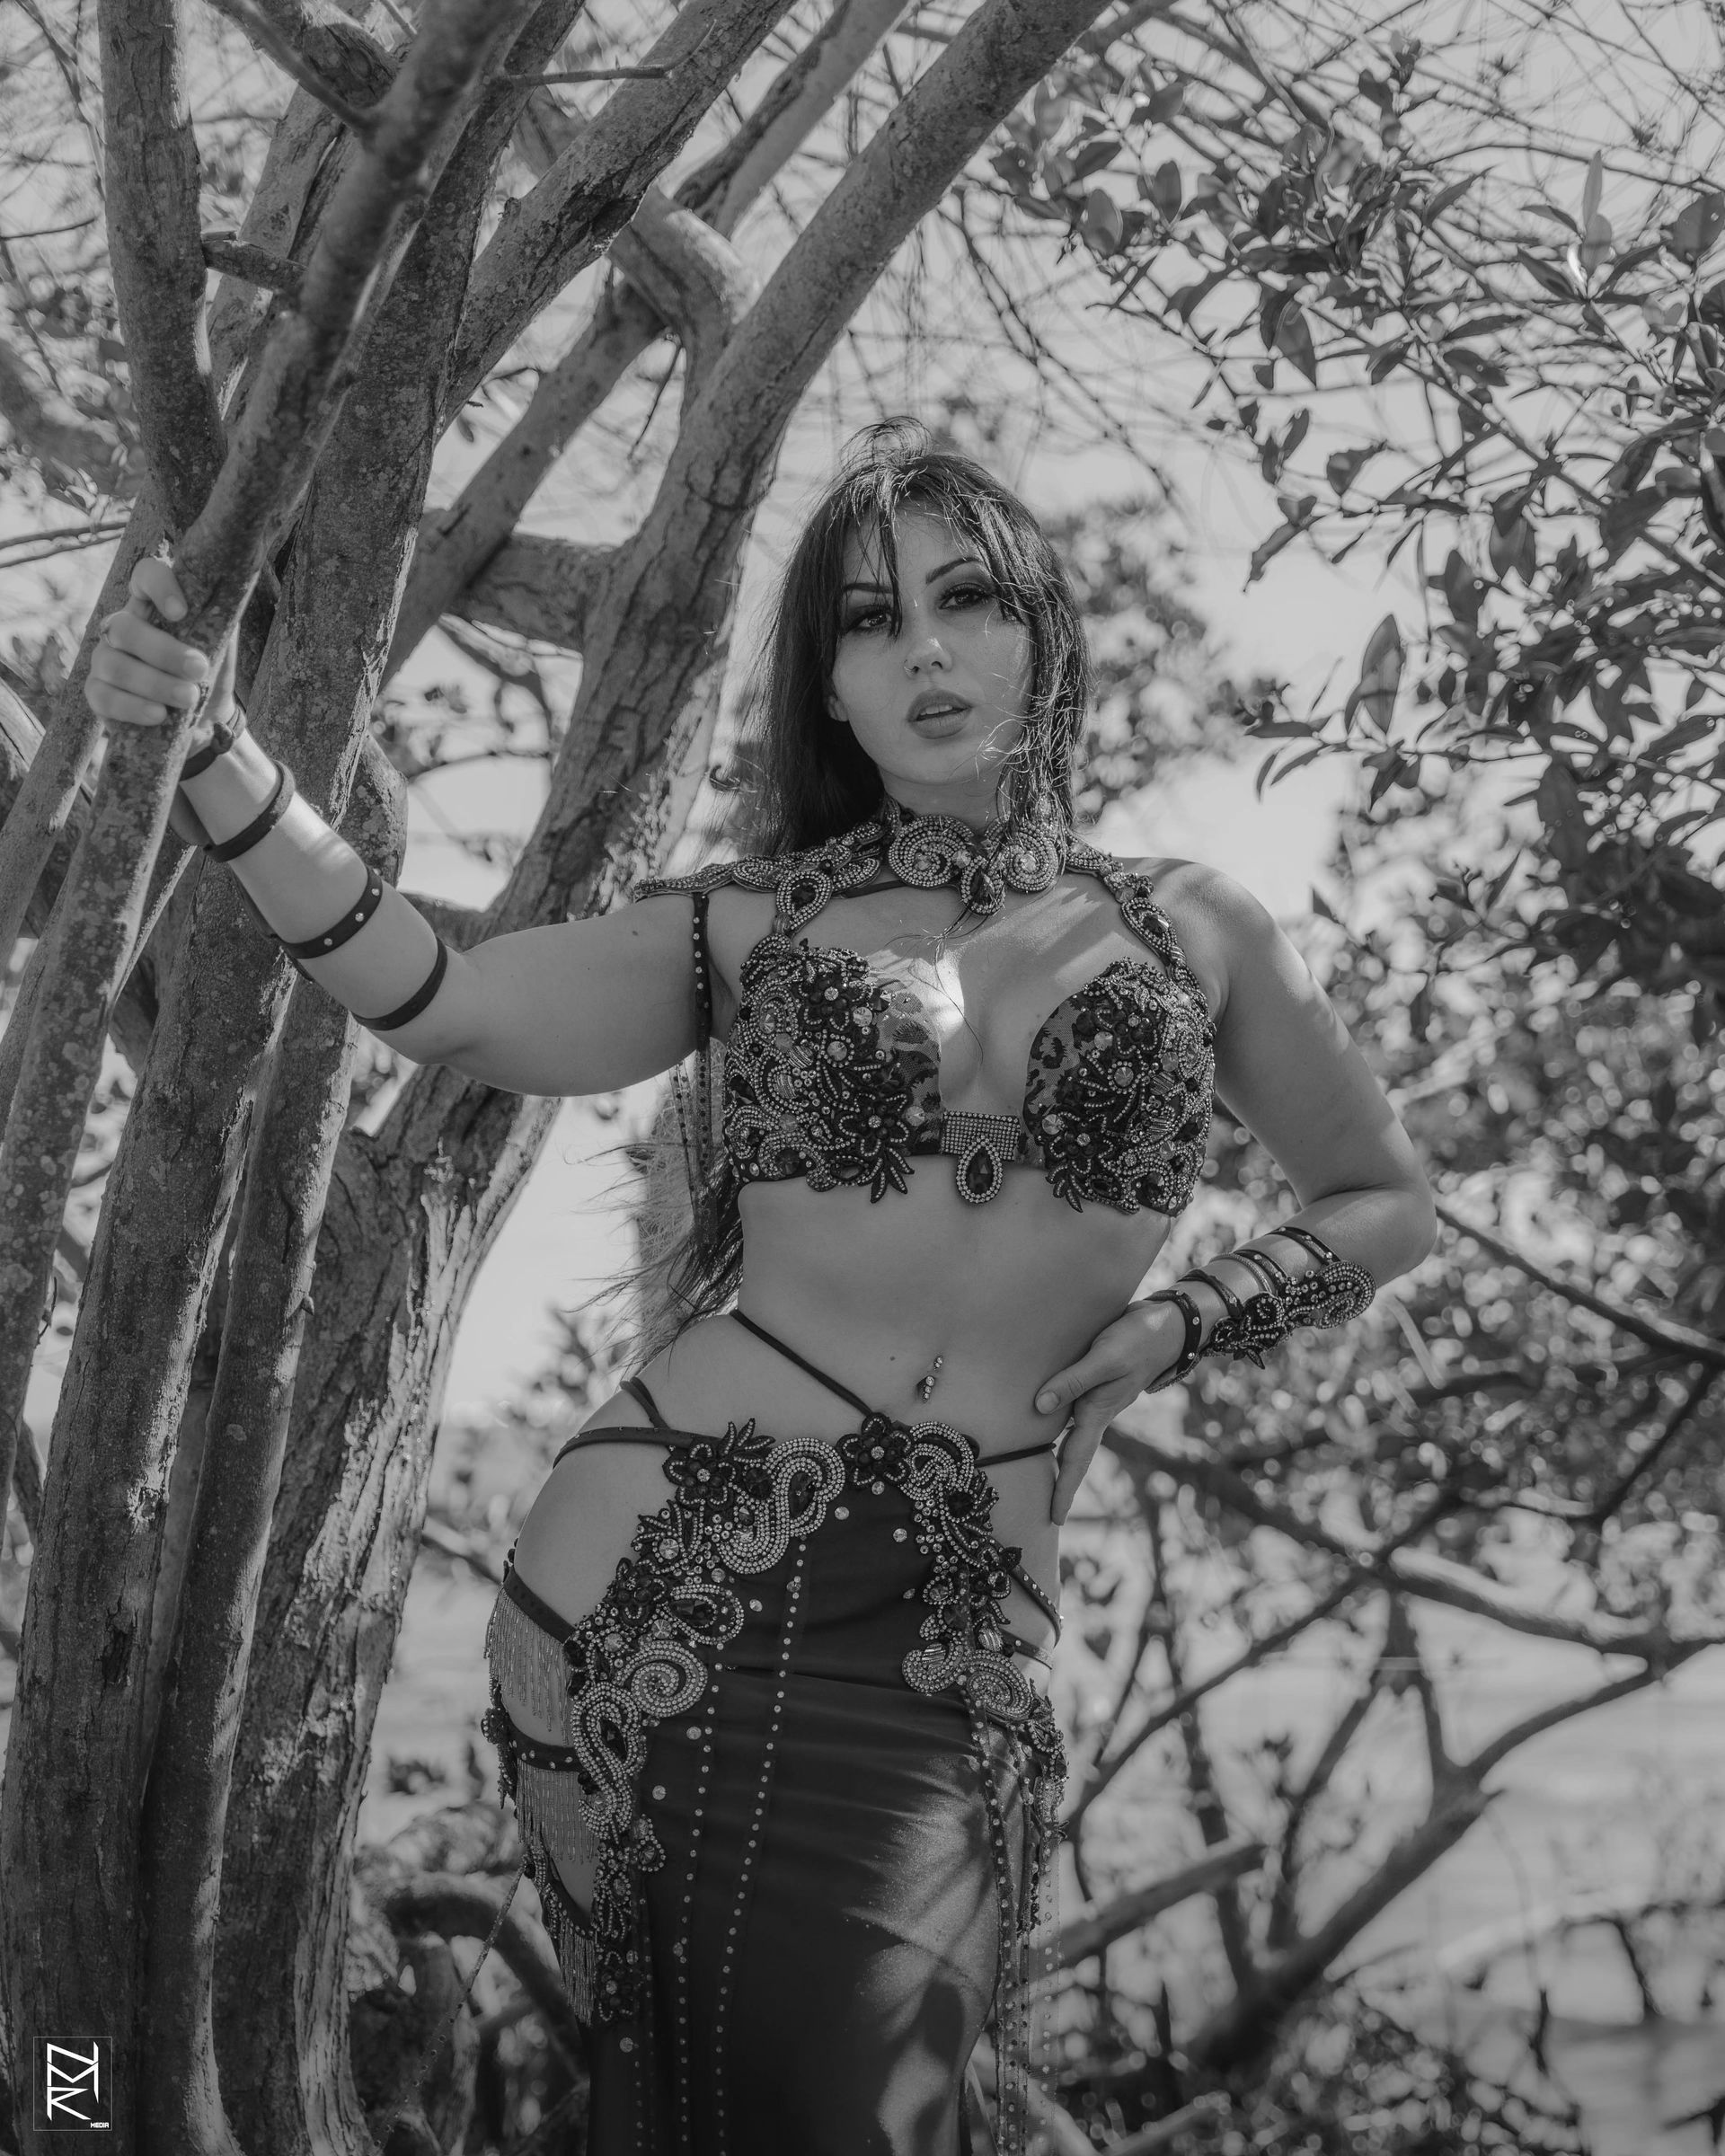 A black and white photo of Belly dancer Azeeria Azizah in a belly dancer costume standing next to a tree.